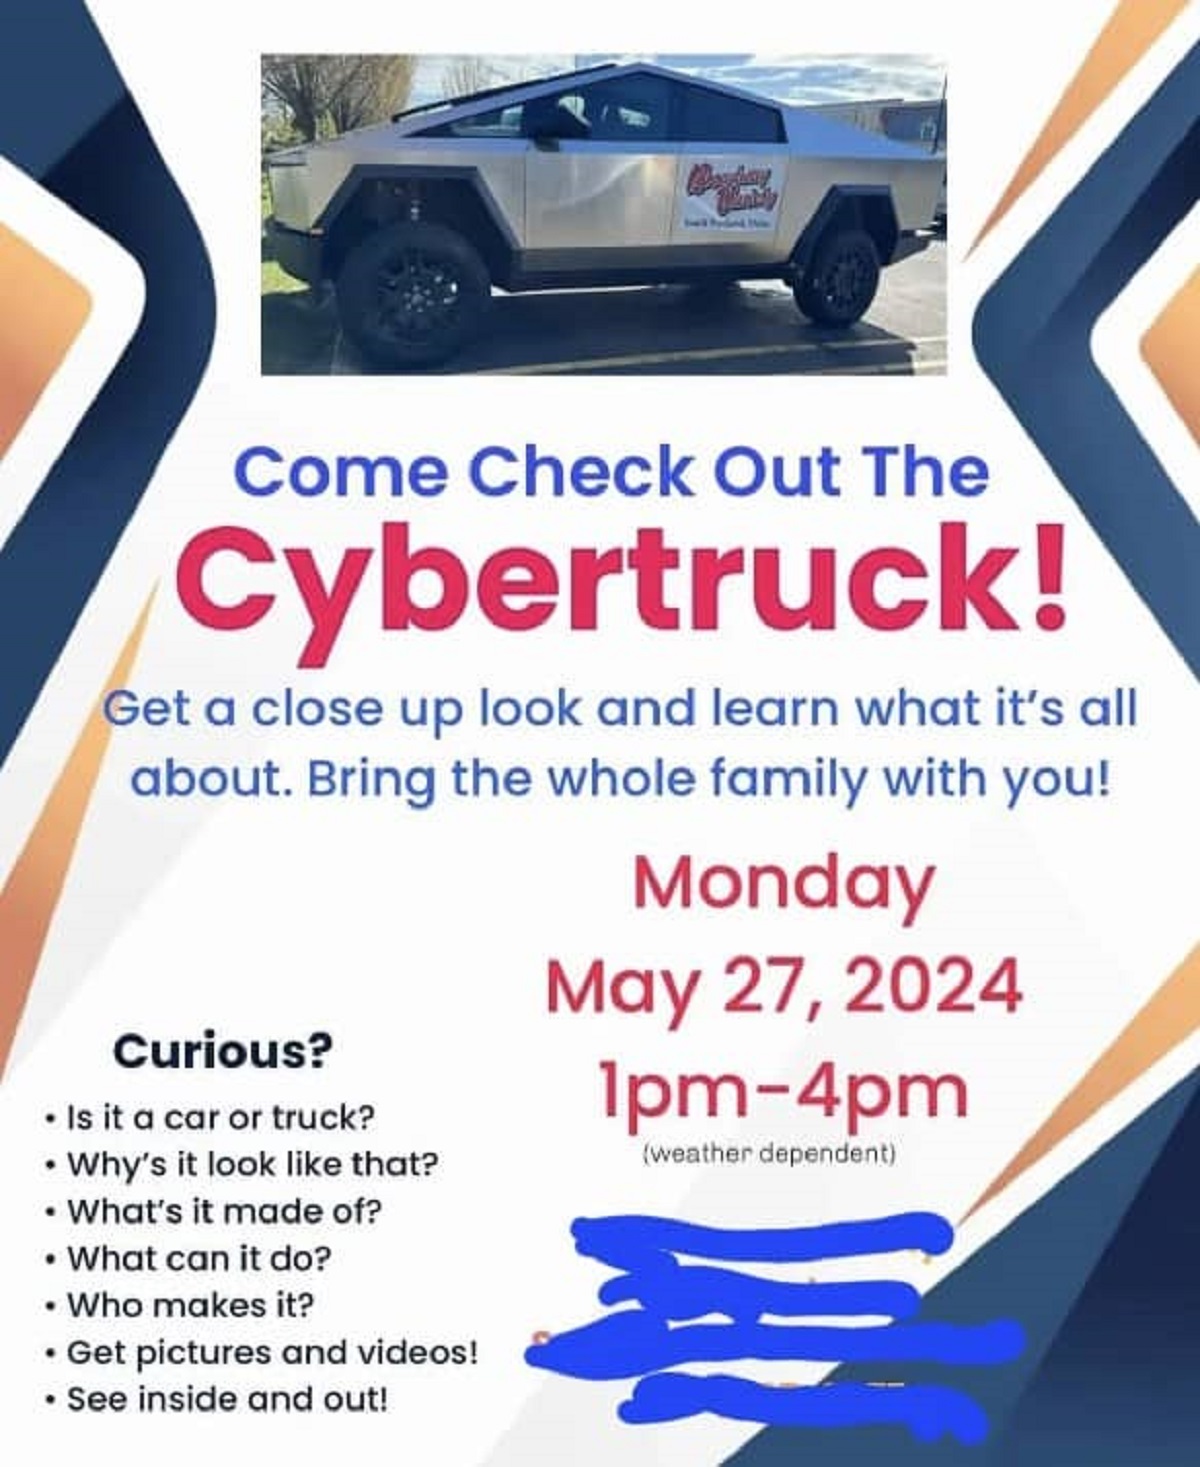 poster - Come Check Out The Cybertruck! Get a close up look and learn what it's all about. Bring the whole family with you! Curious? Is it a car or truck? Why's it look that? What's it made of? What can it do? Who makes it? Get pictures and videos! See in